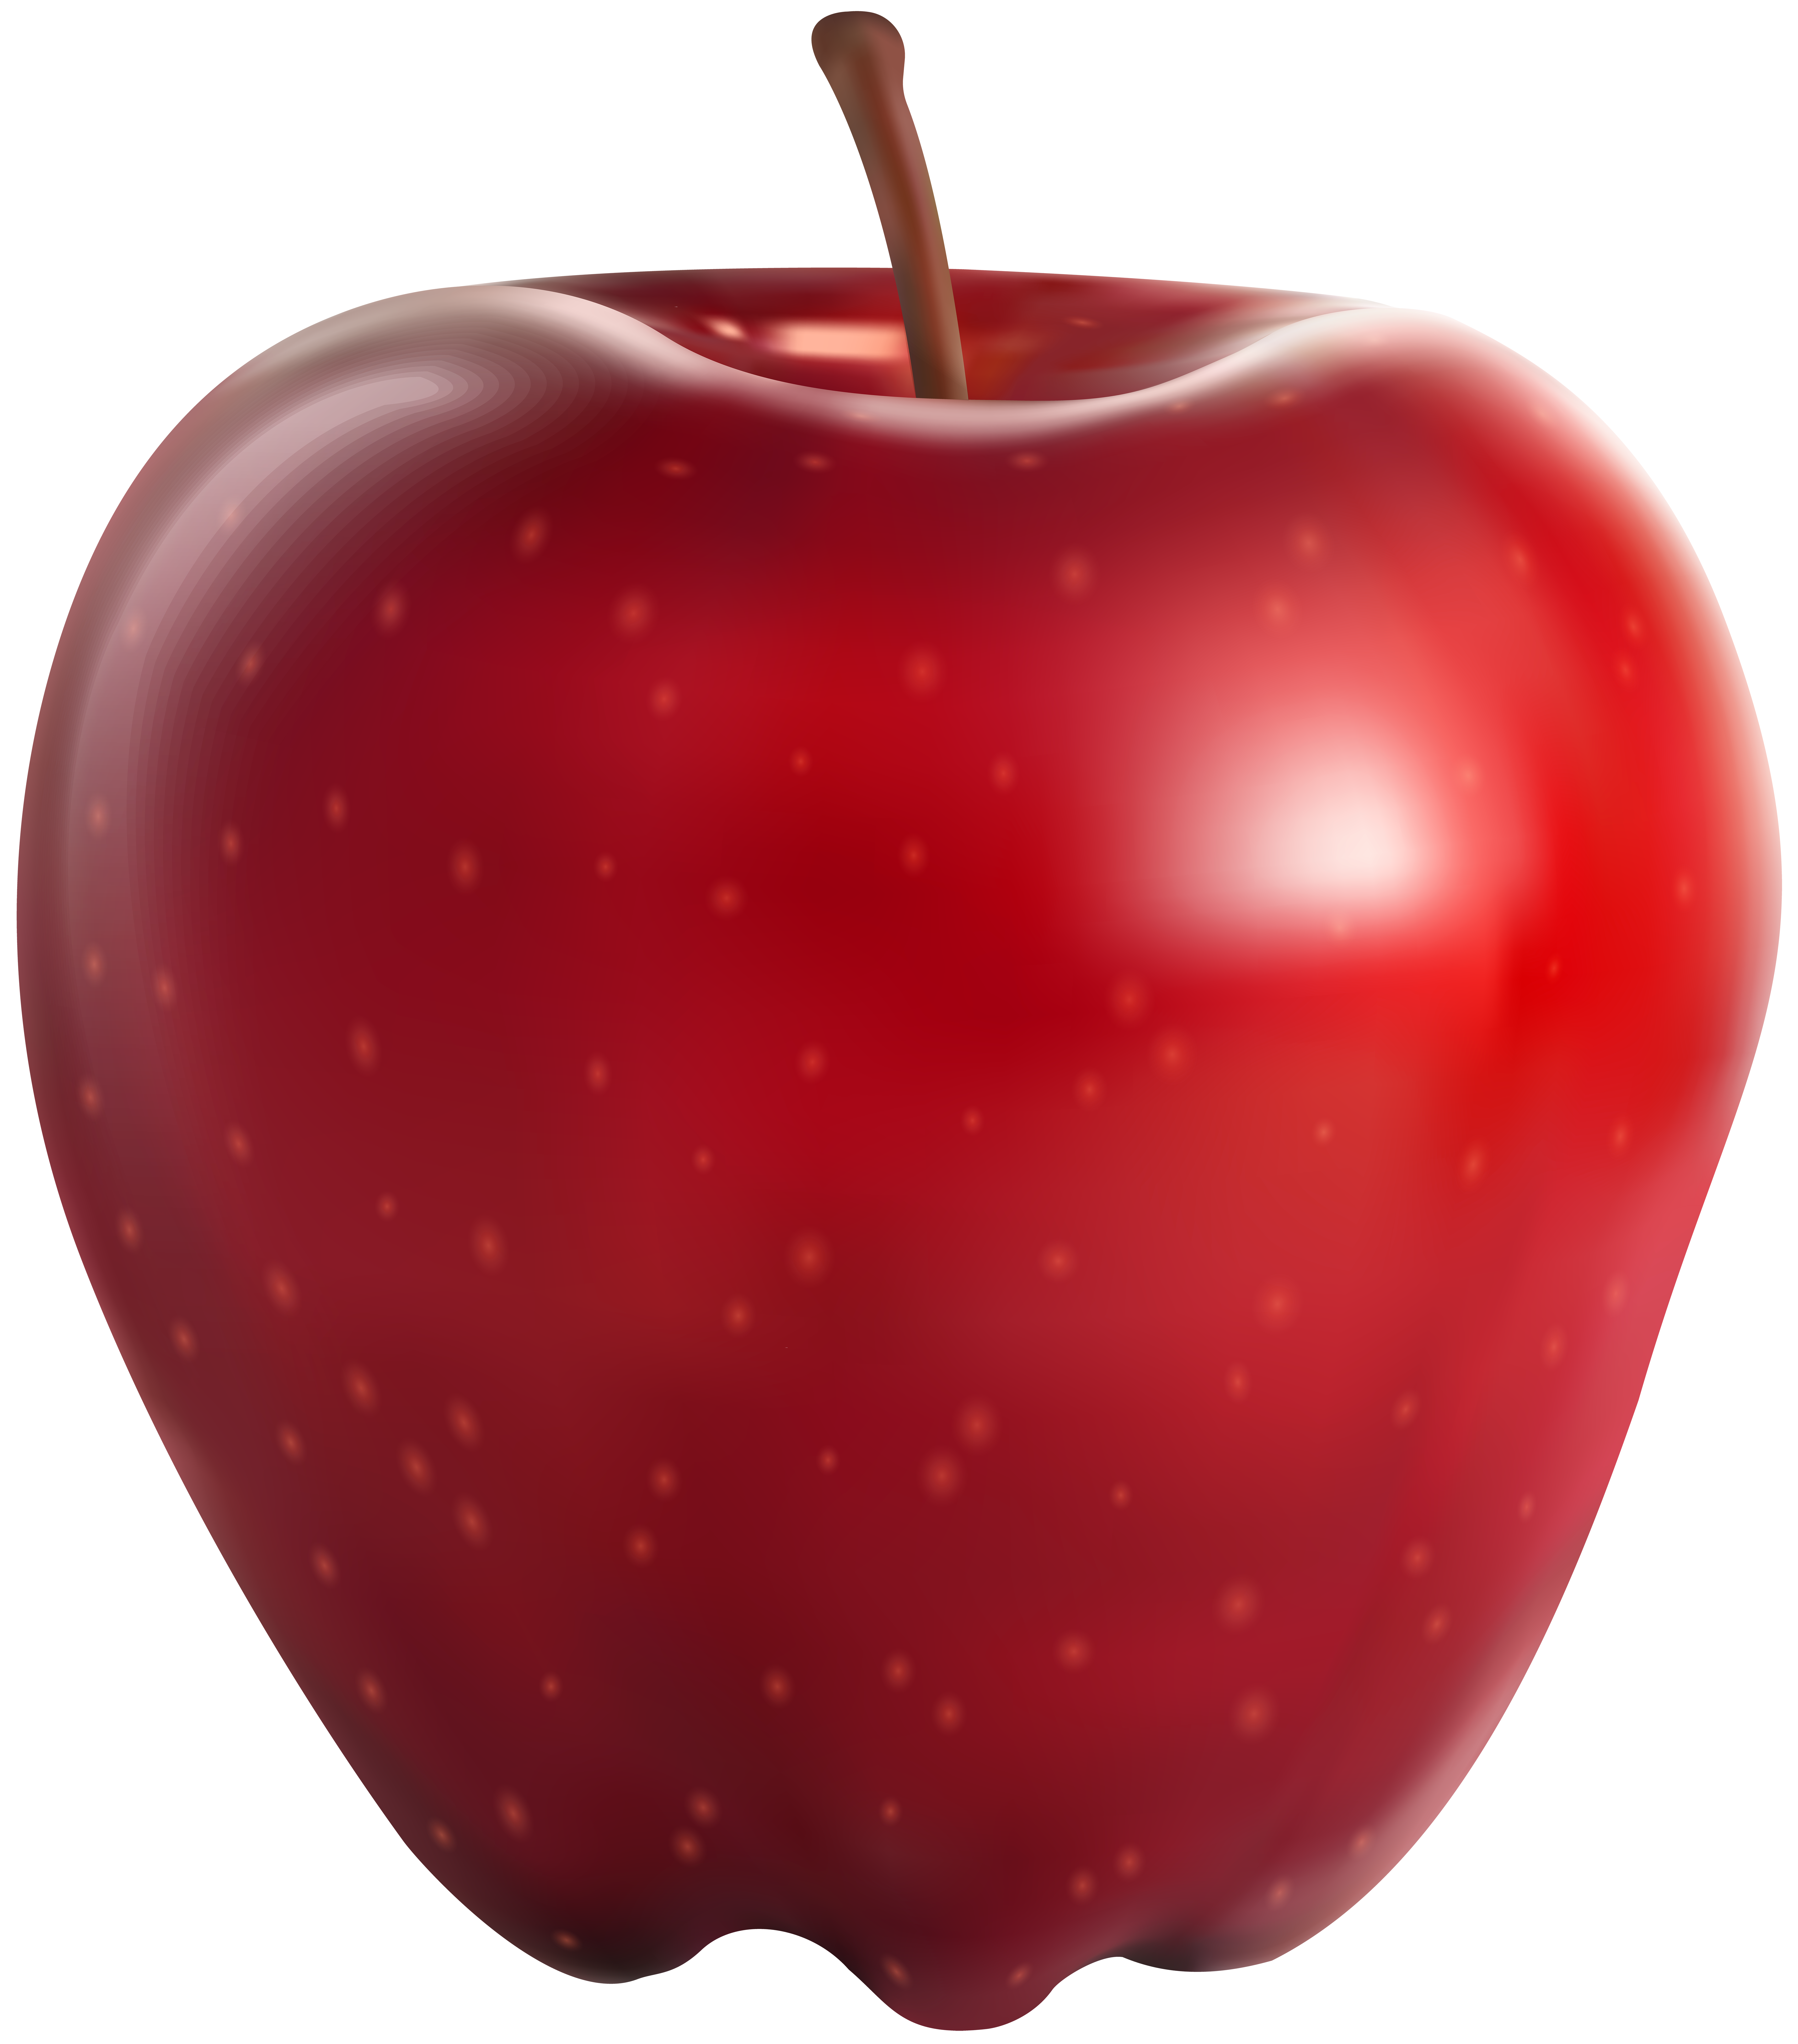 Red Apple Images  Free Photos, PNG Stickers, Wallpapers